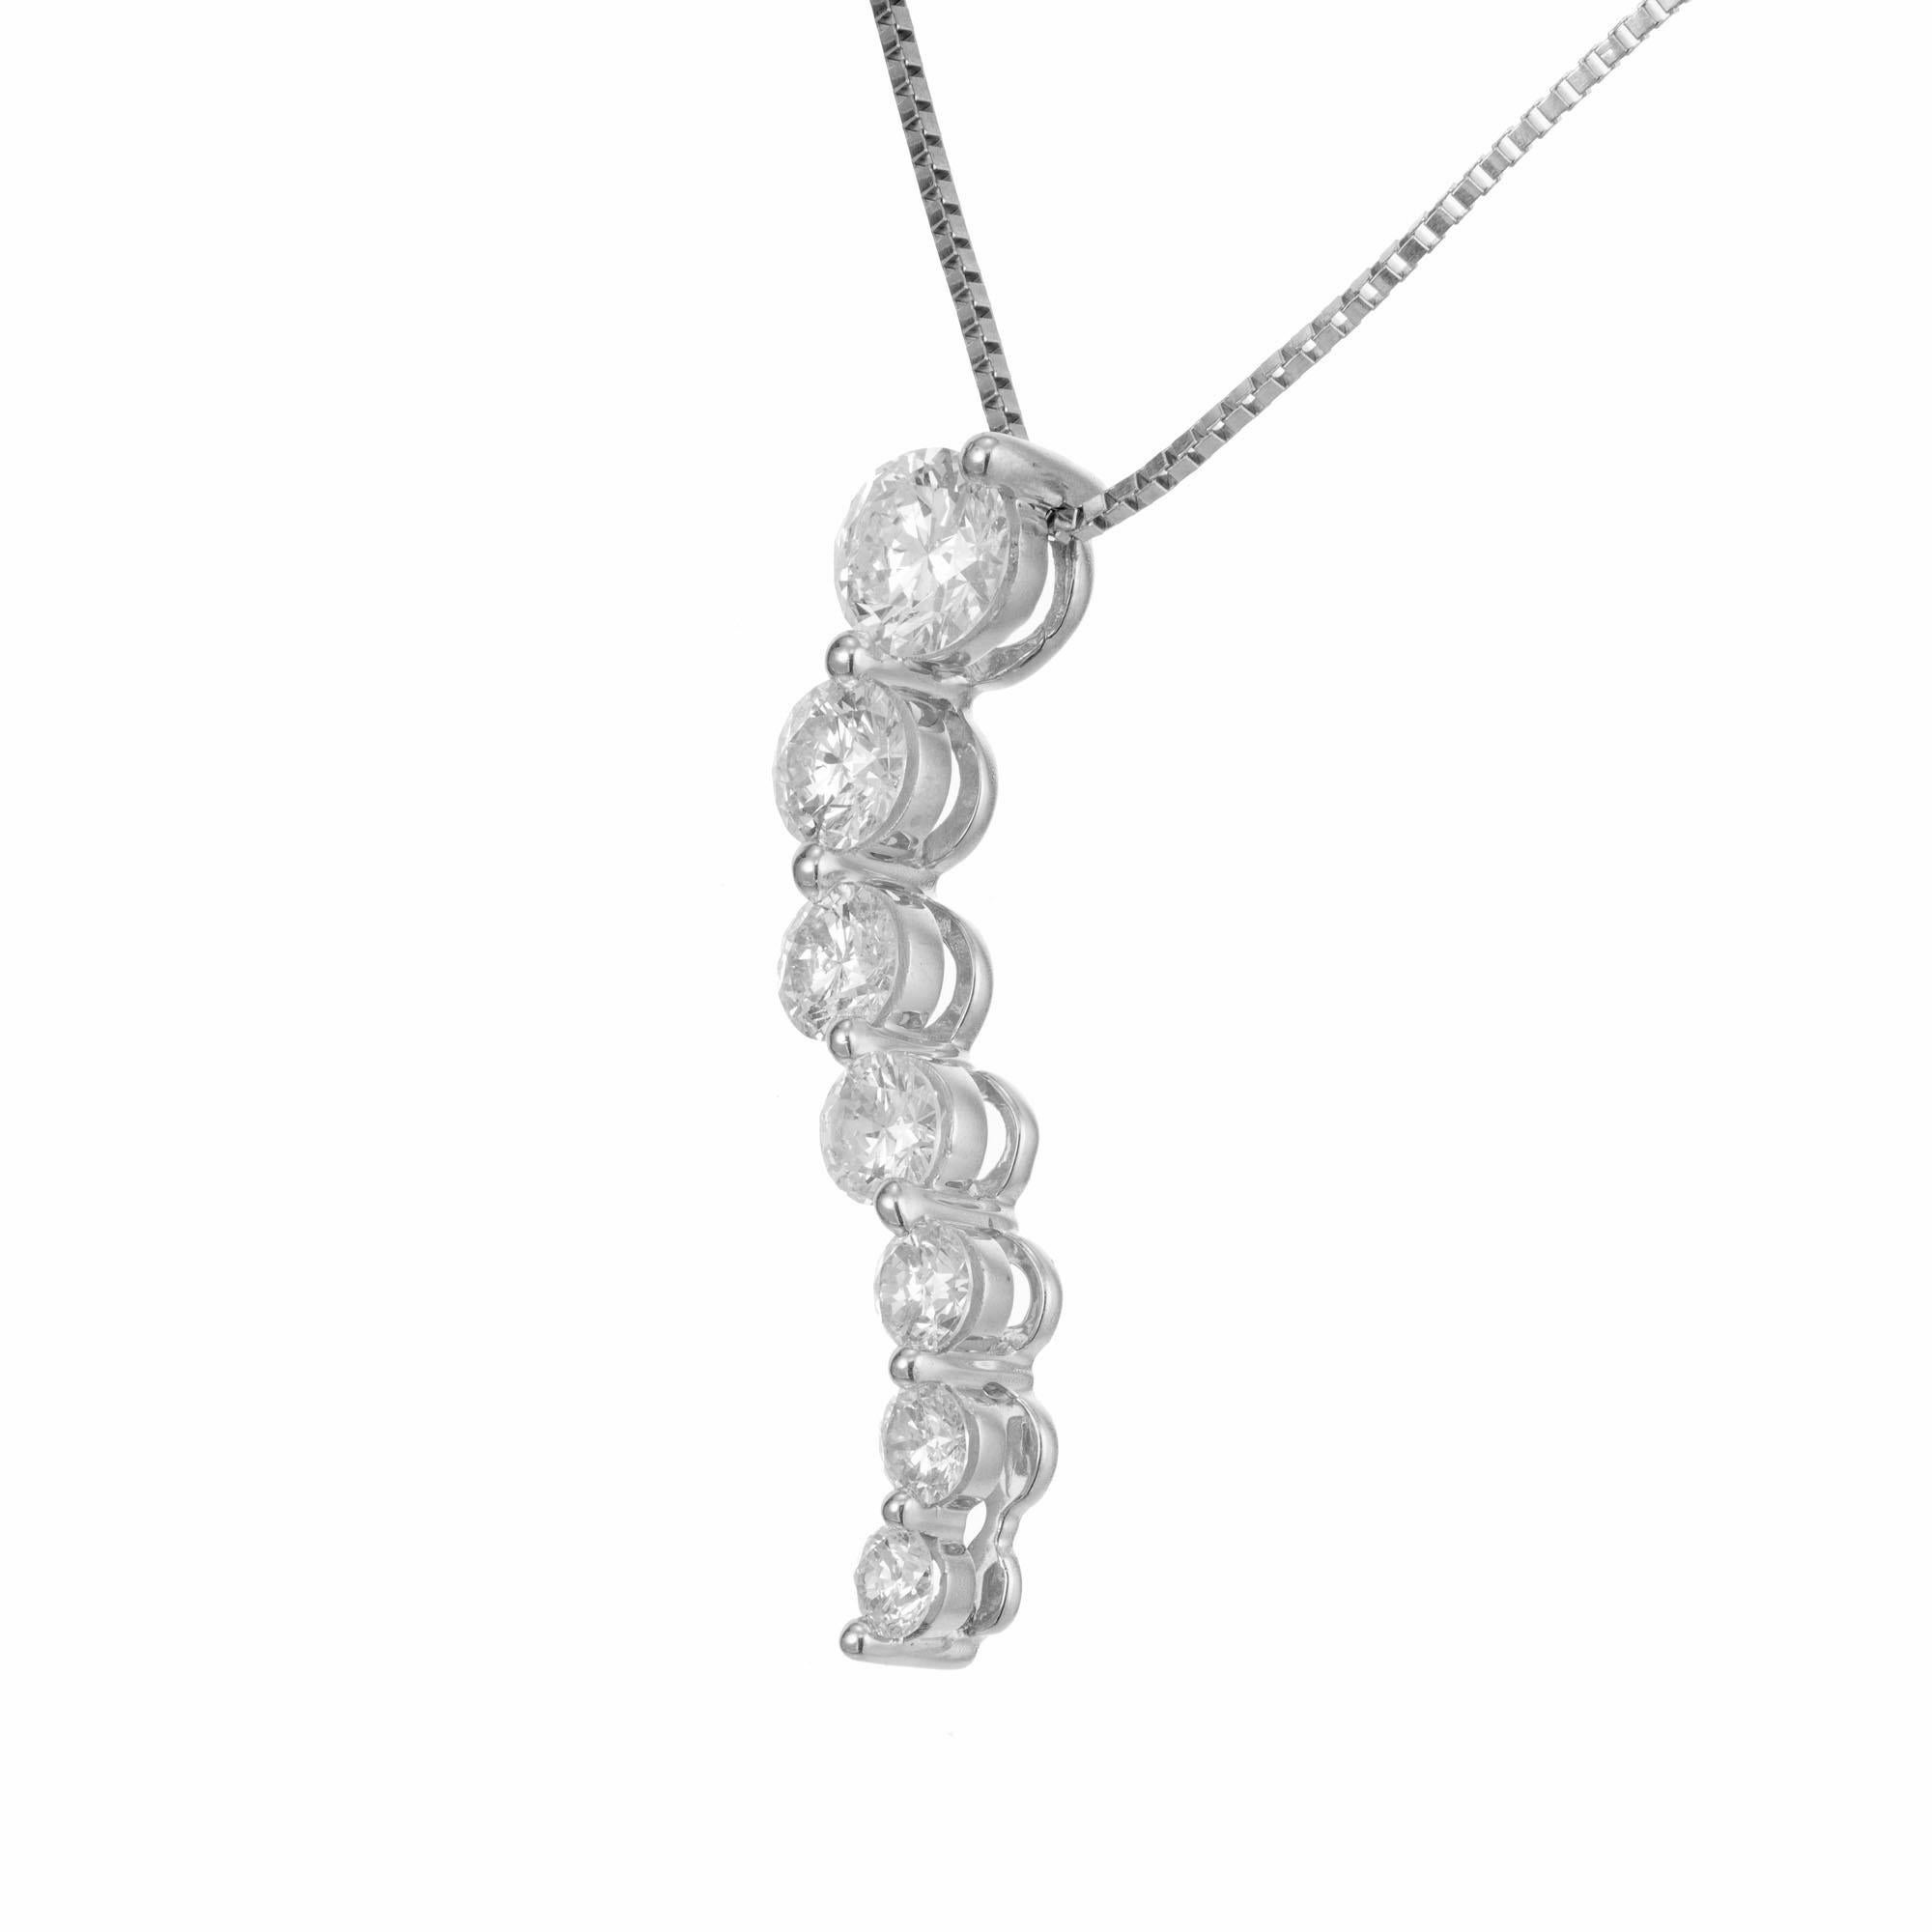 Graduated diamond pendant necklace. 7 brilliant cut diamonds set in 14k white gold with a 19 inch long box chain. 

7 brilliant cut diamonds, .33ct to .05ct each, approx. total weight 1.00ct, G to H, SI1 to SI2
14k White Gold
Stamped: SEI 14k
2.7